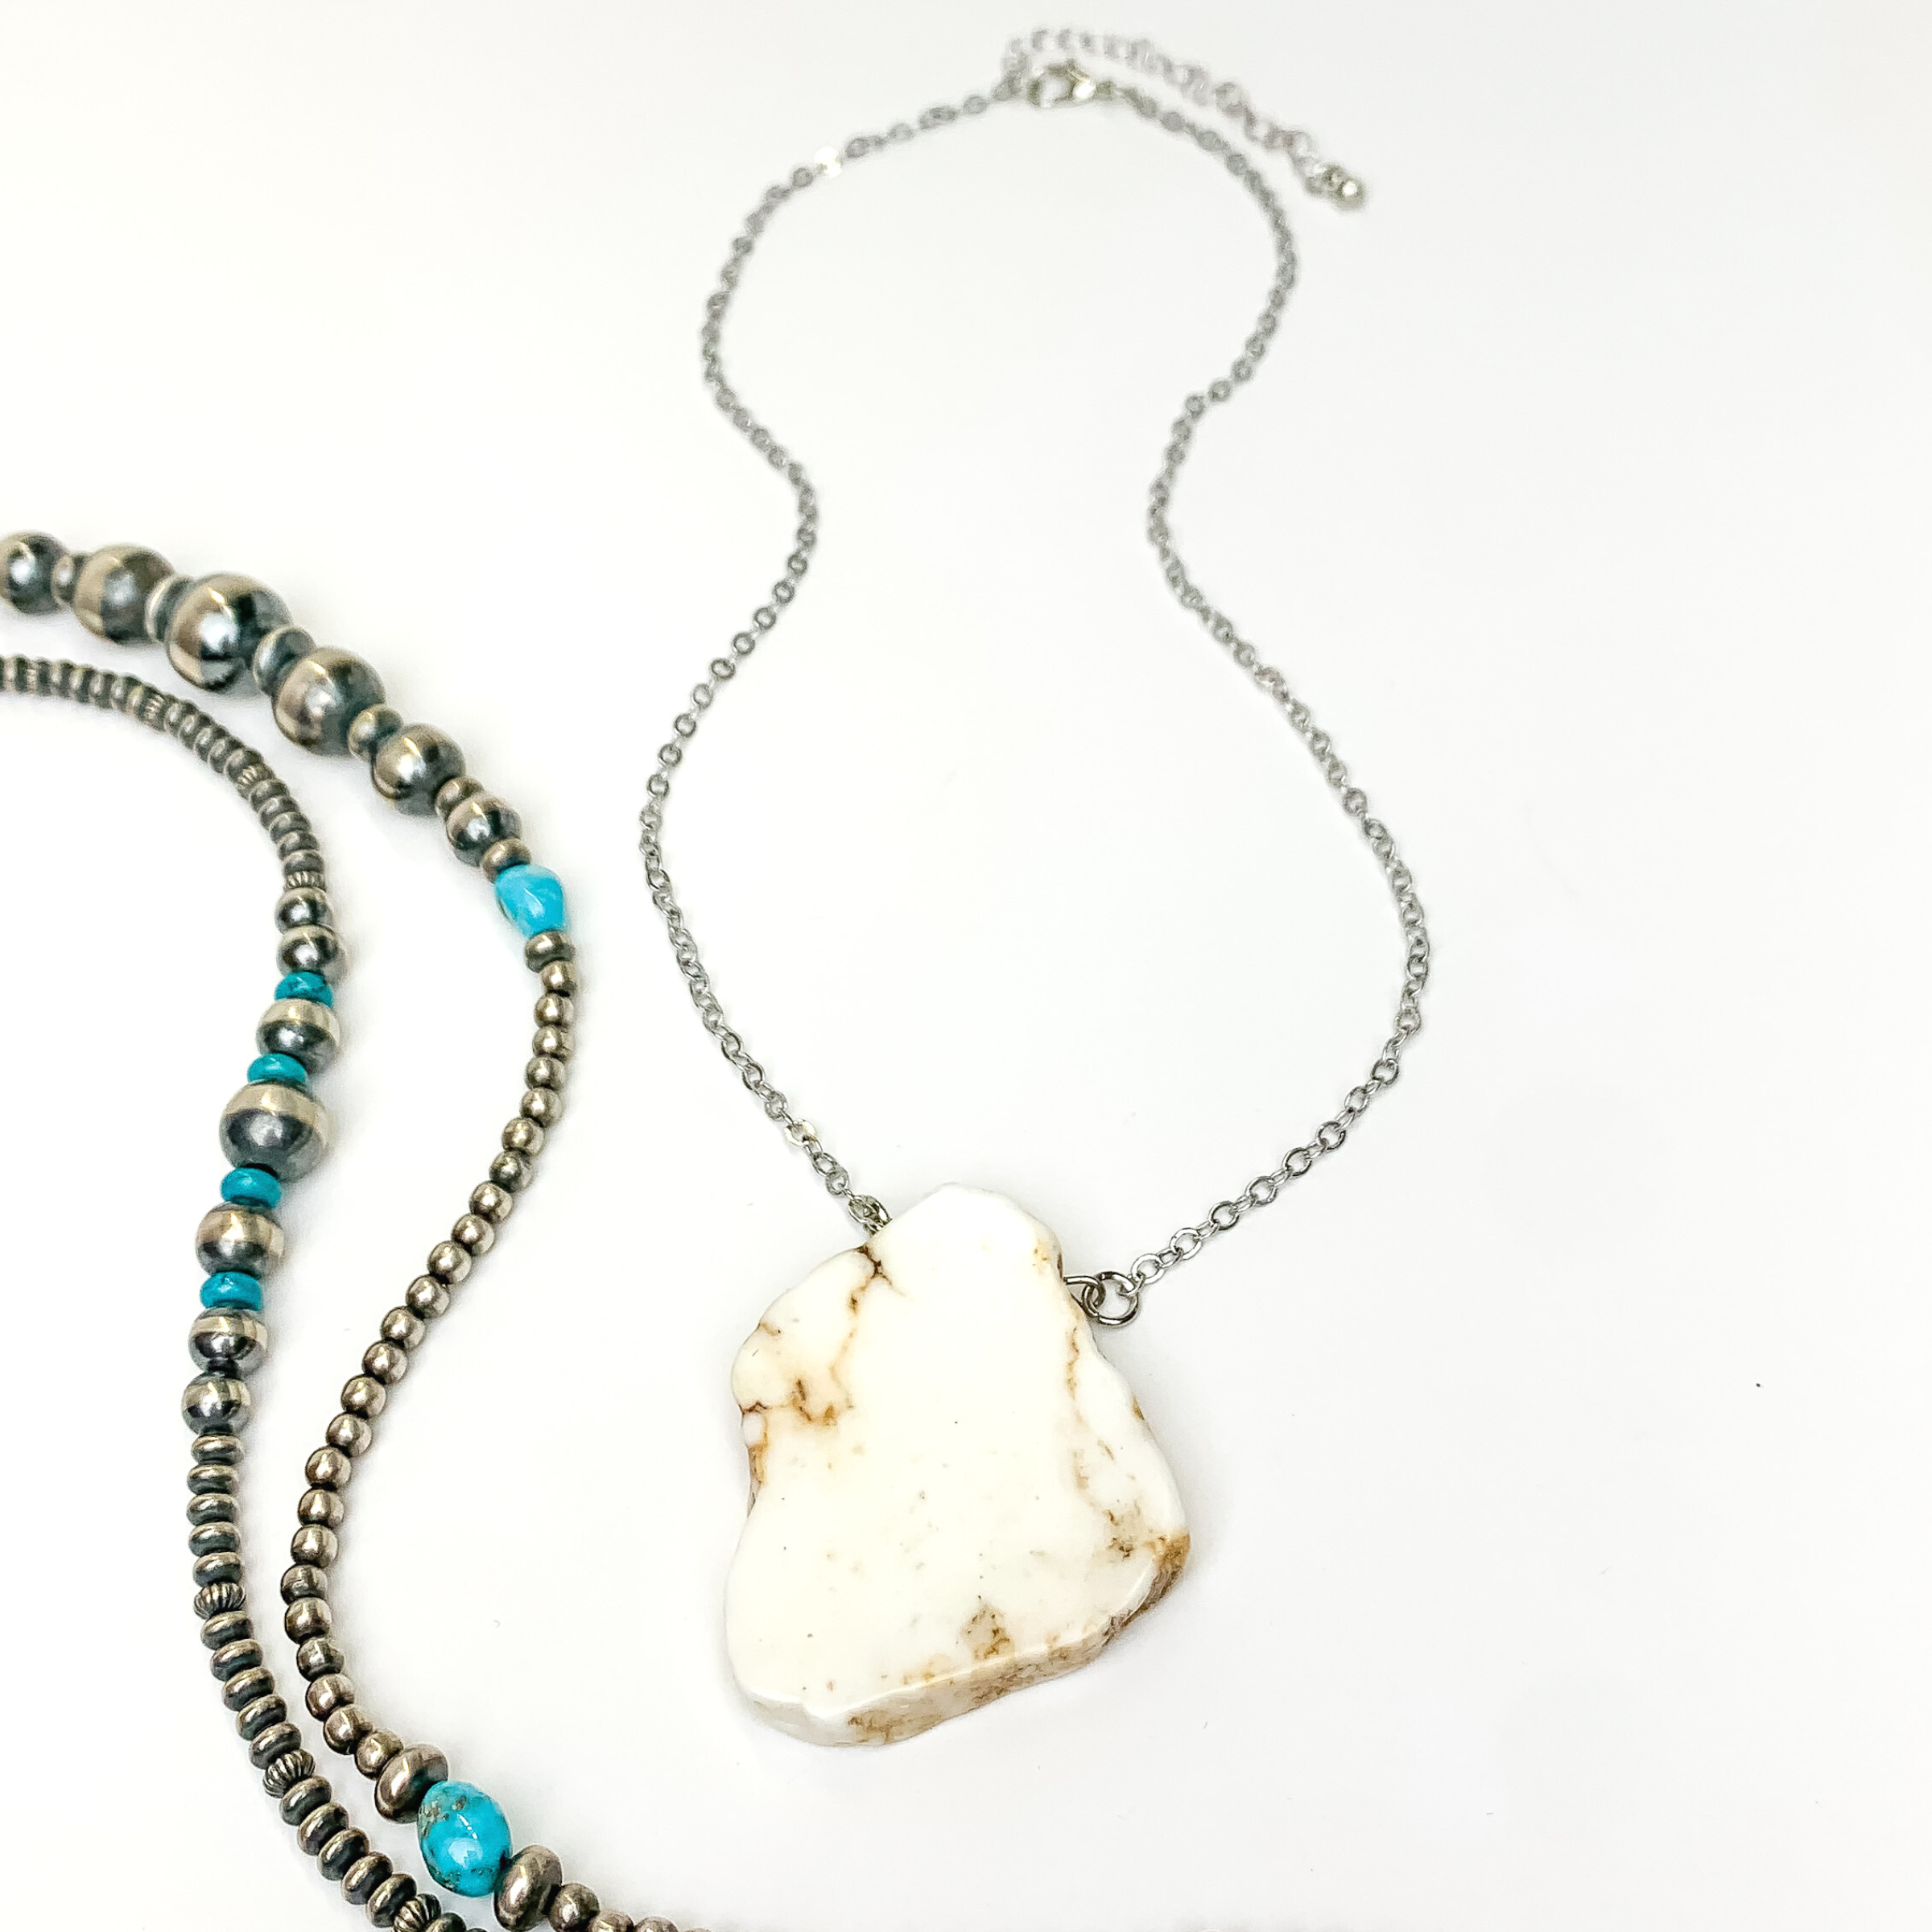 Silver chain necklace with ivory slab pendant. This necklace is pictured on an white background with silver and turquoise beads on the right side of the picture.